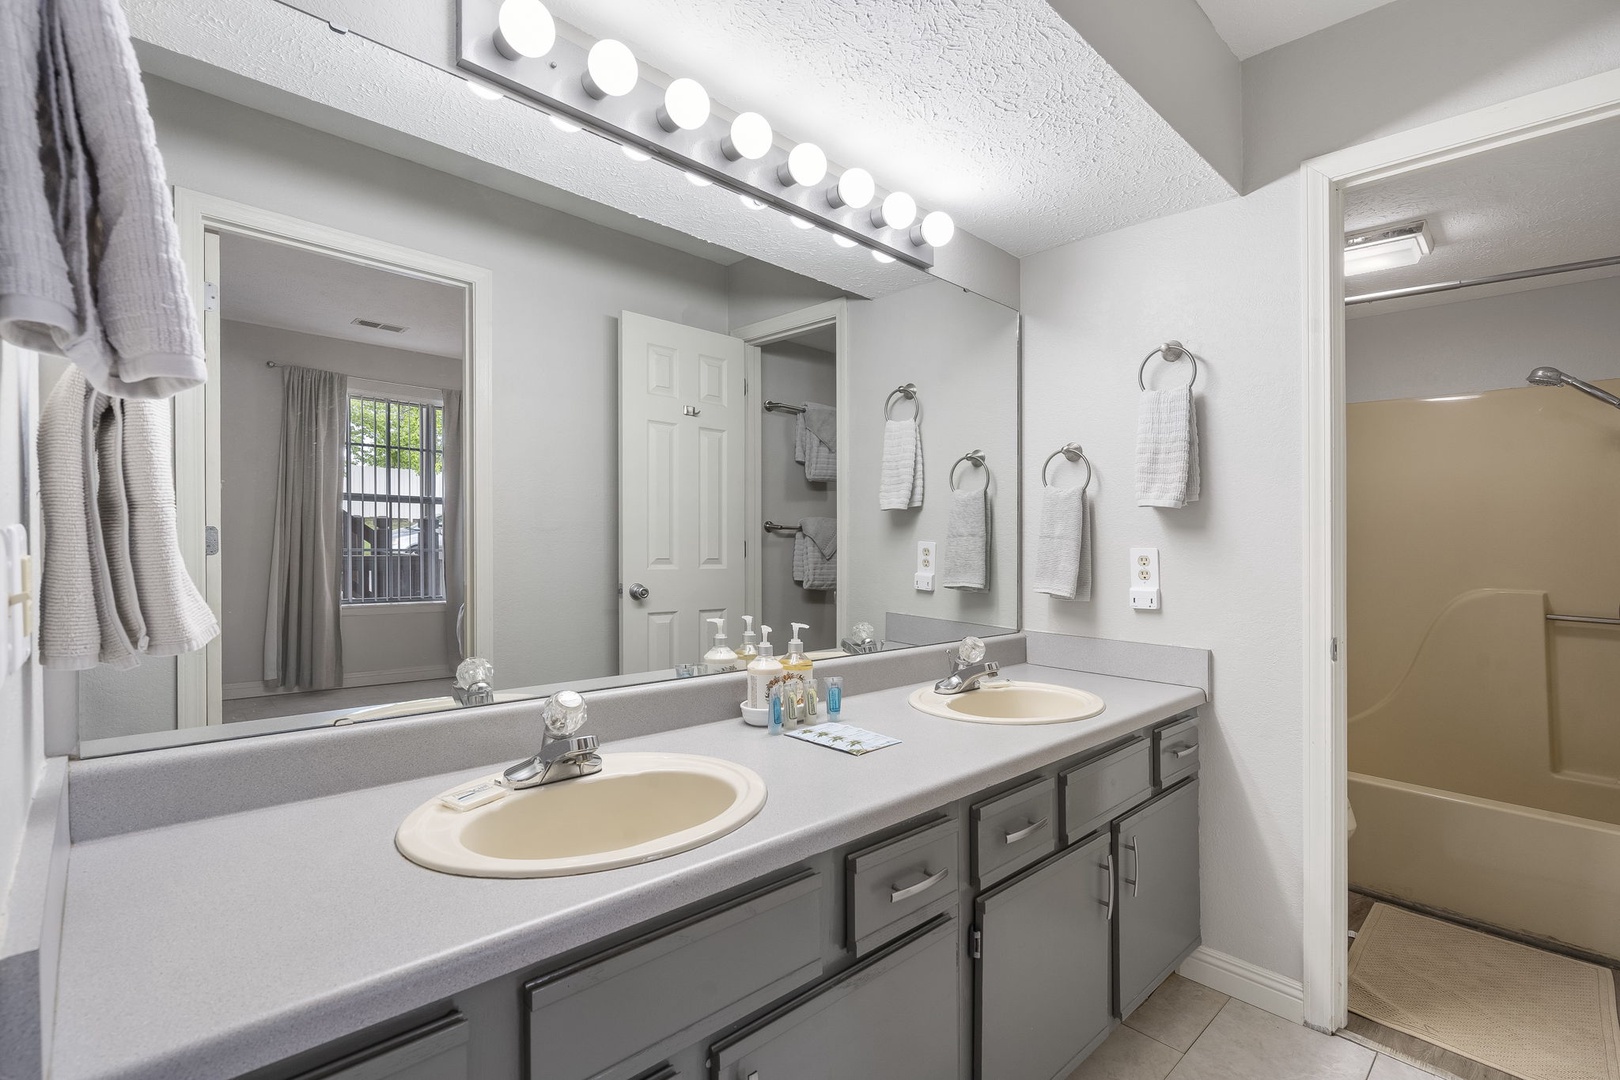 The Bathroom offers an oversized Double Vanity and Shower/Tub Combo